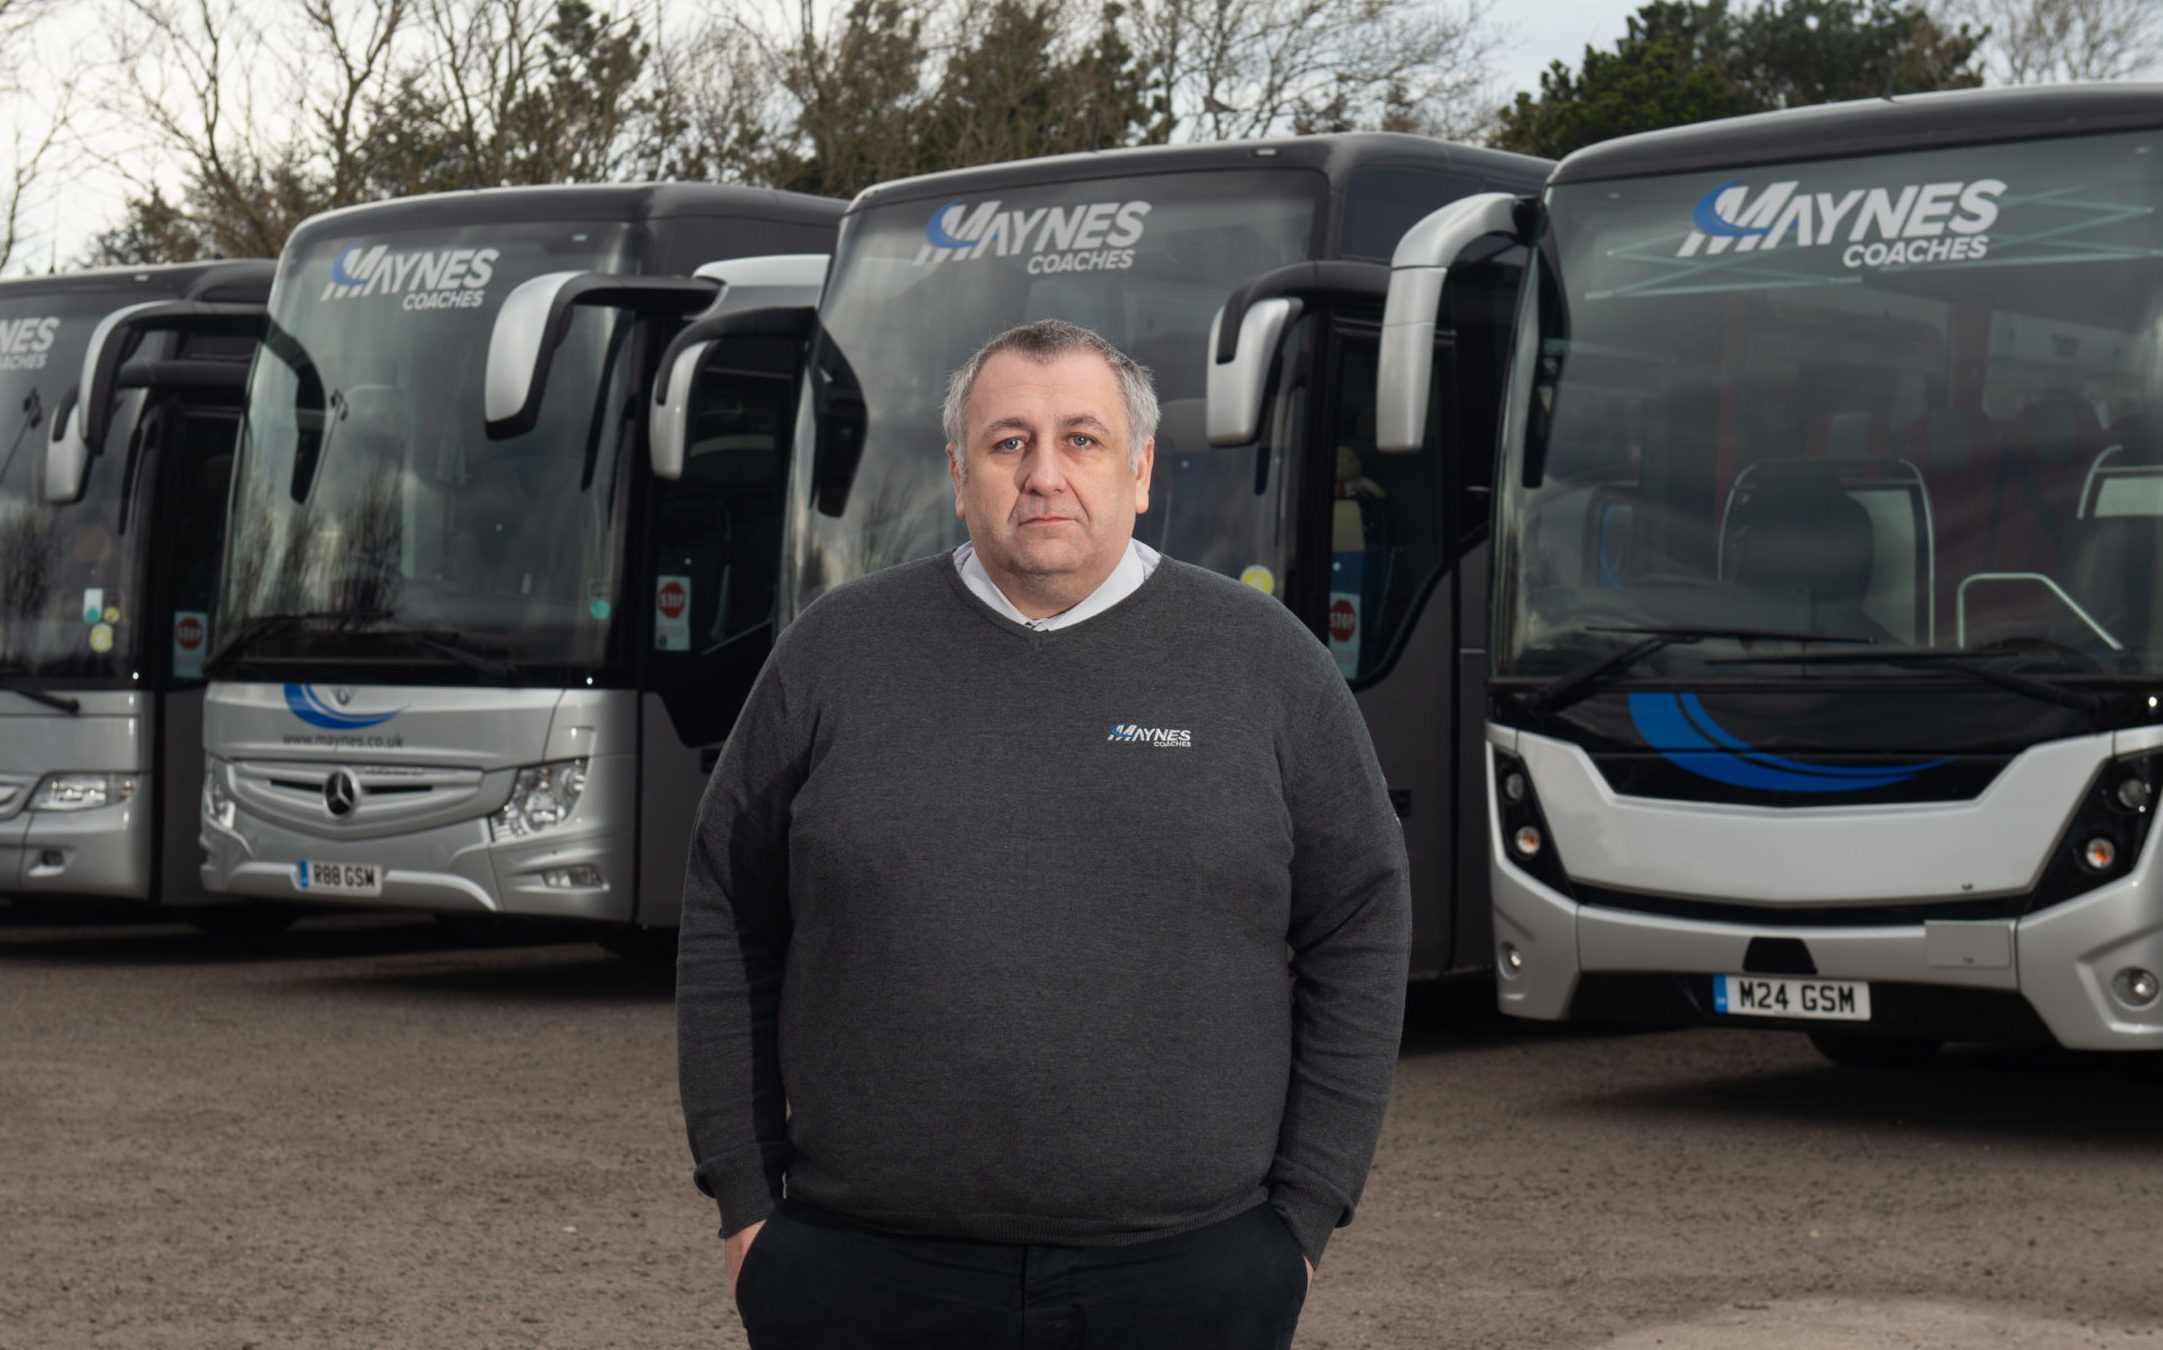 Kevin Mayne, operations director of Maynes Coaches.